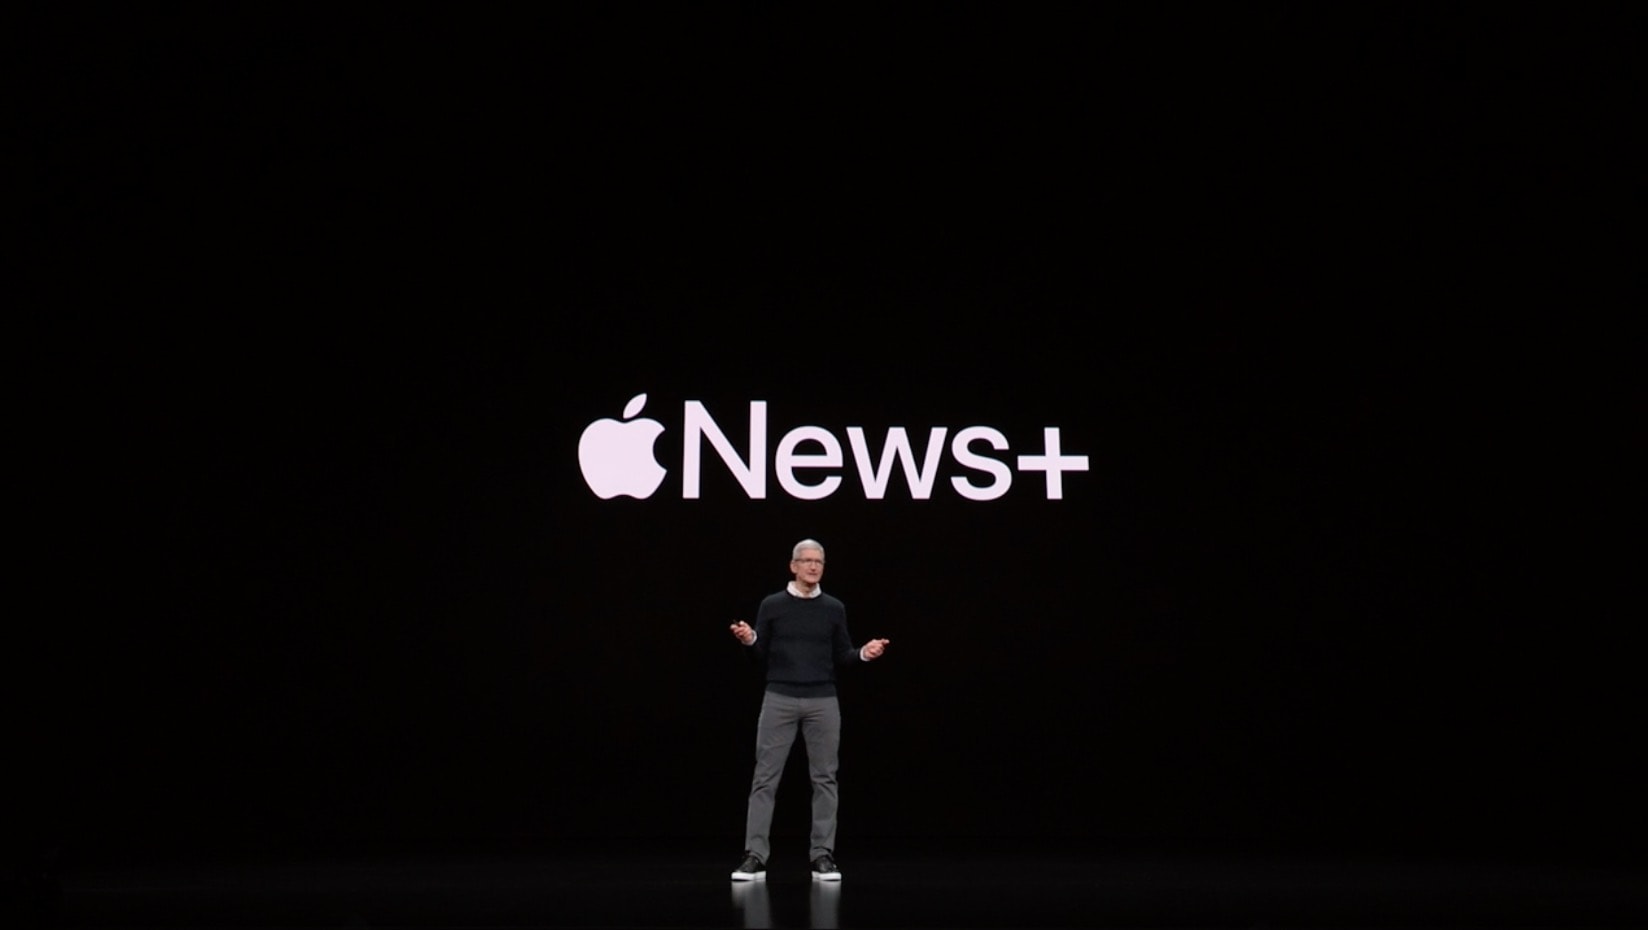 Some publishers report that Apple News+ isn't a 'huge boon' for business